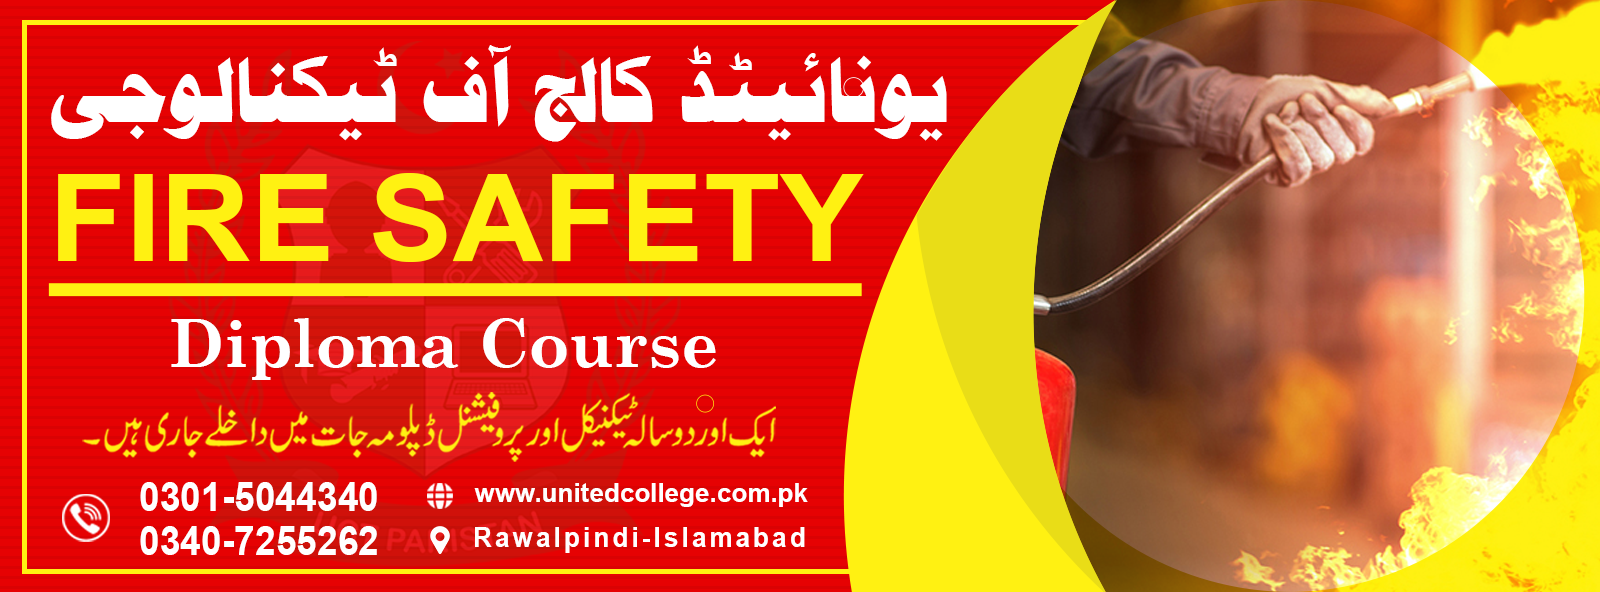 FIRE SAFETY COURSE